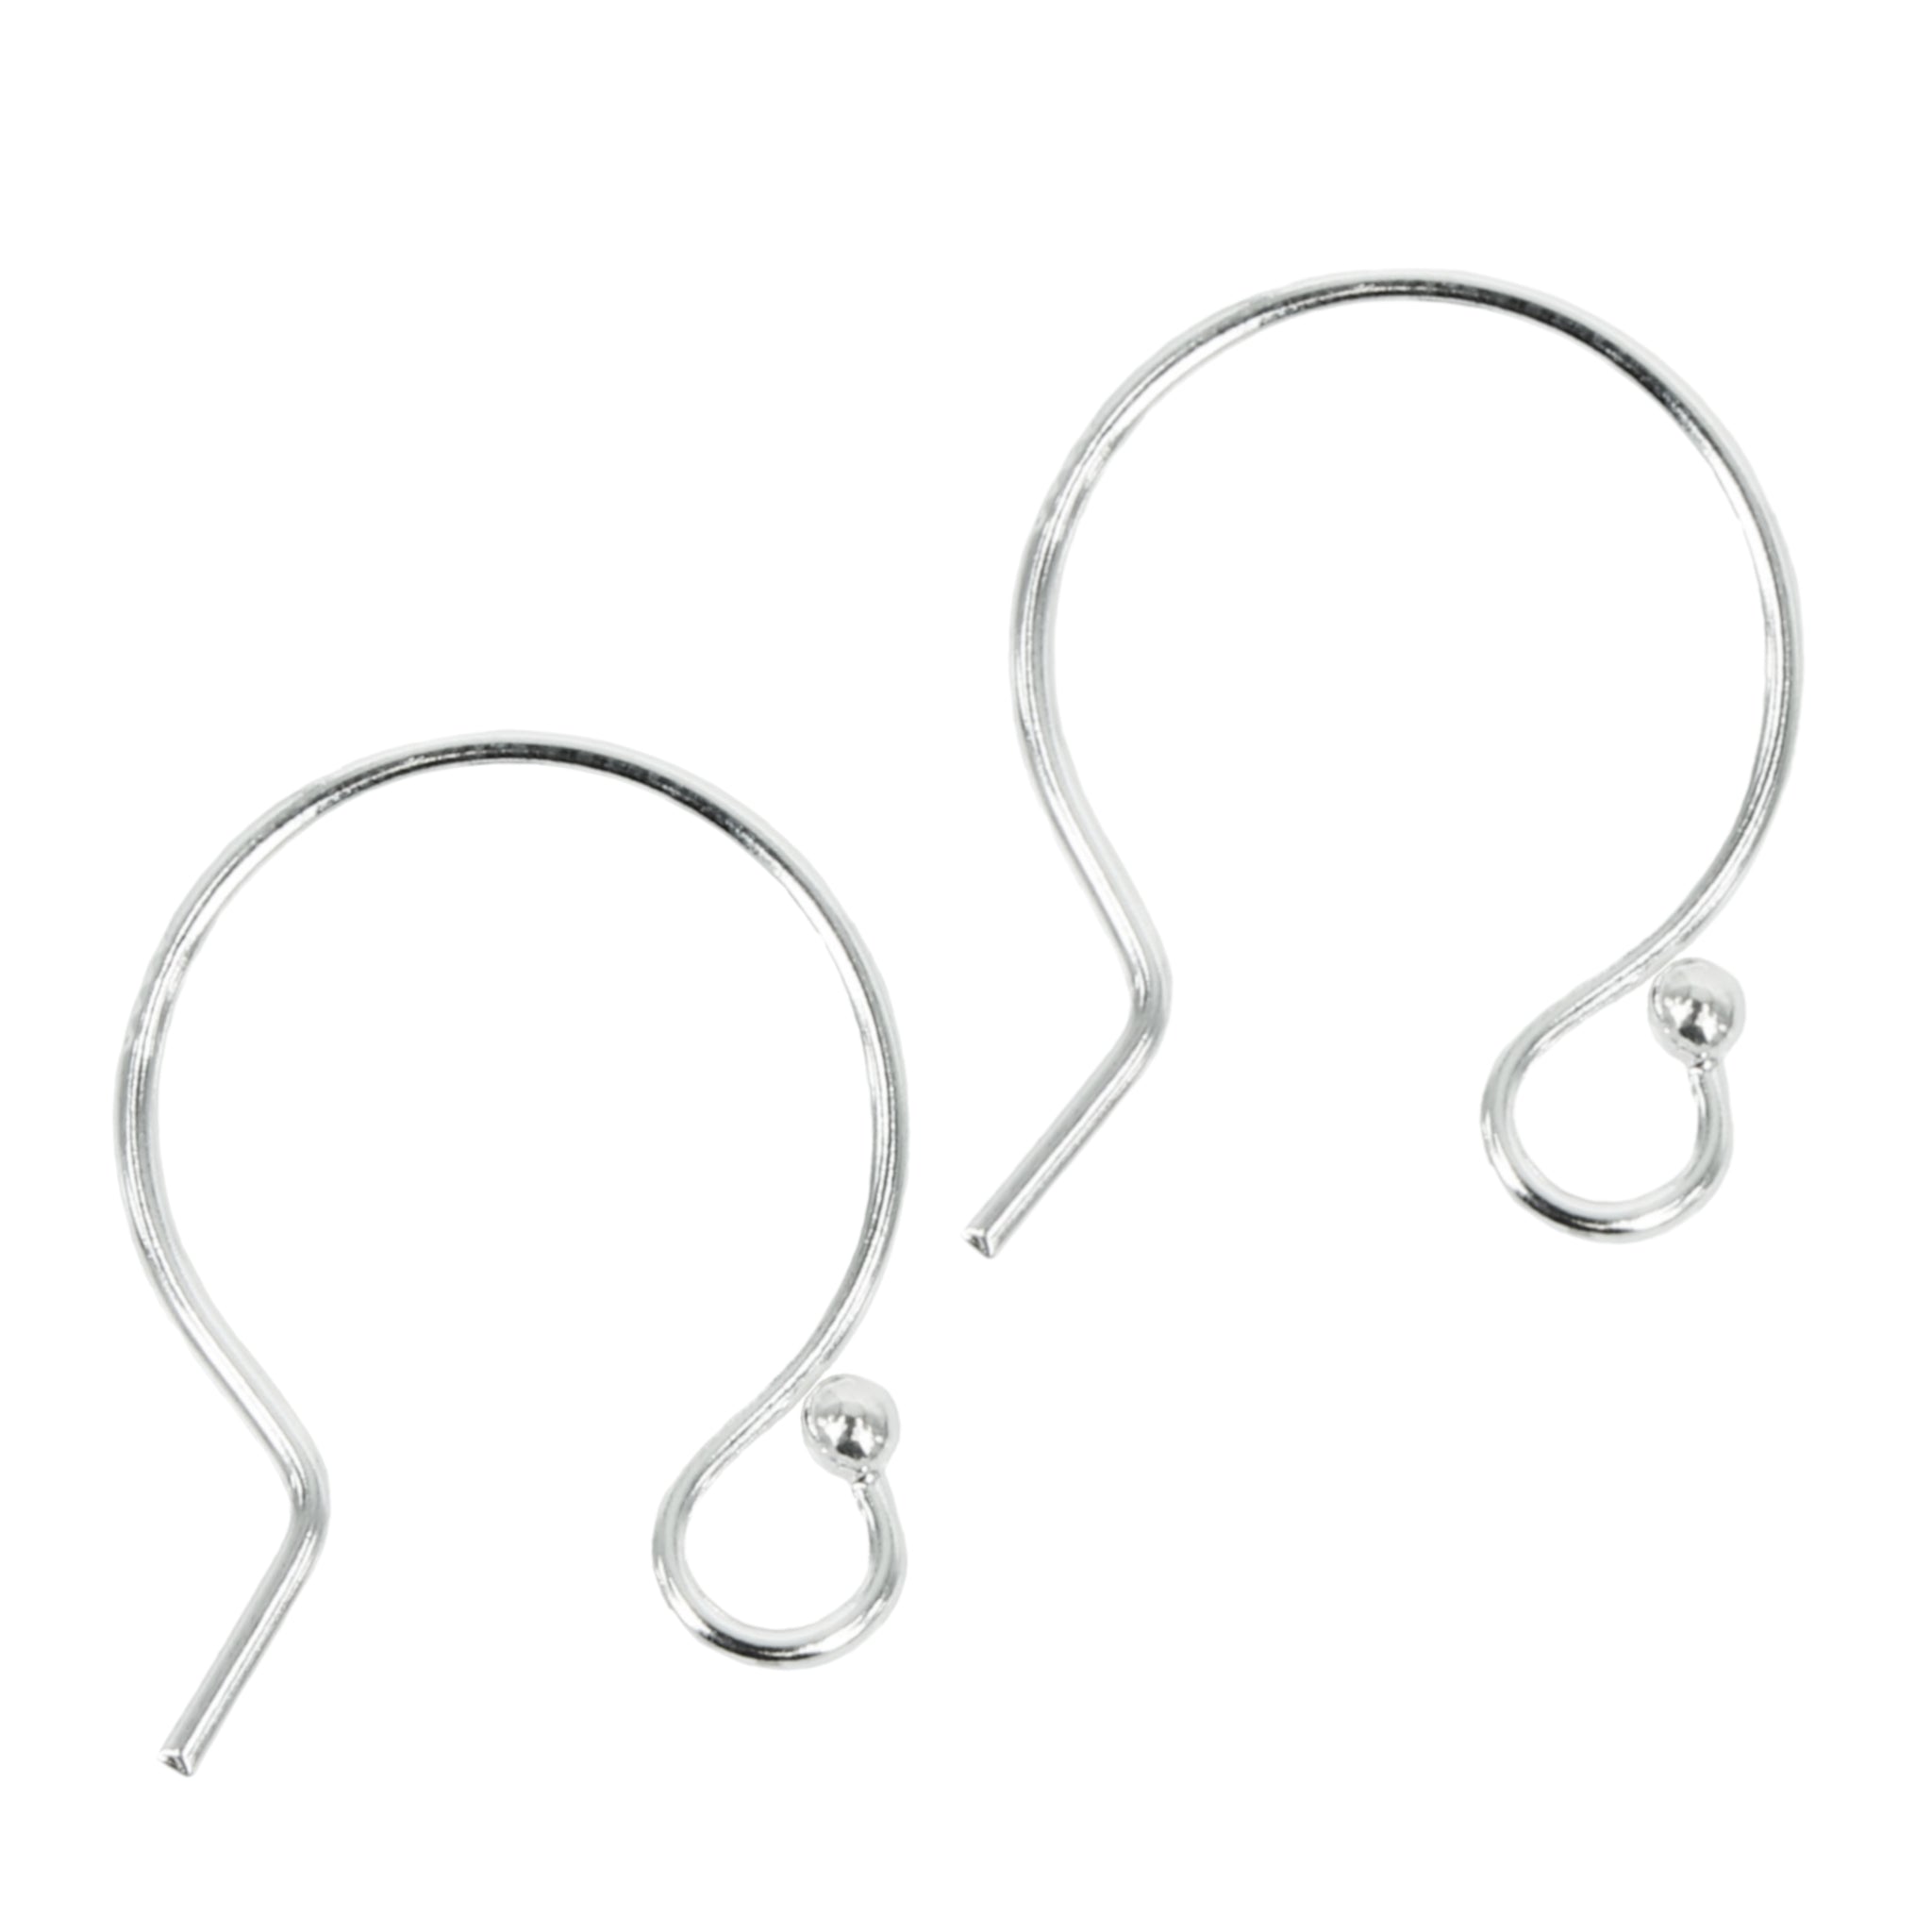 Earwires with Round Shape in Sterling Silver 15x19mm - 20 Gauge